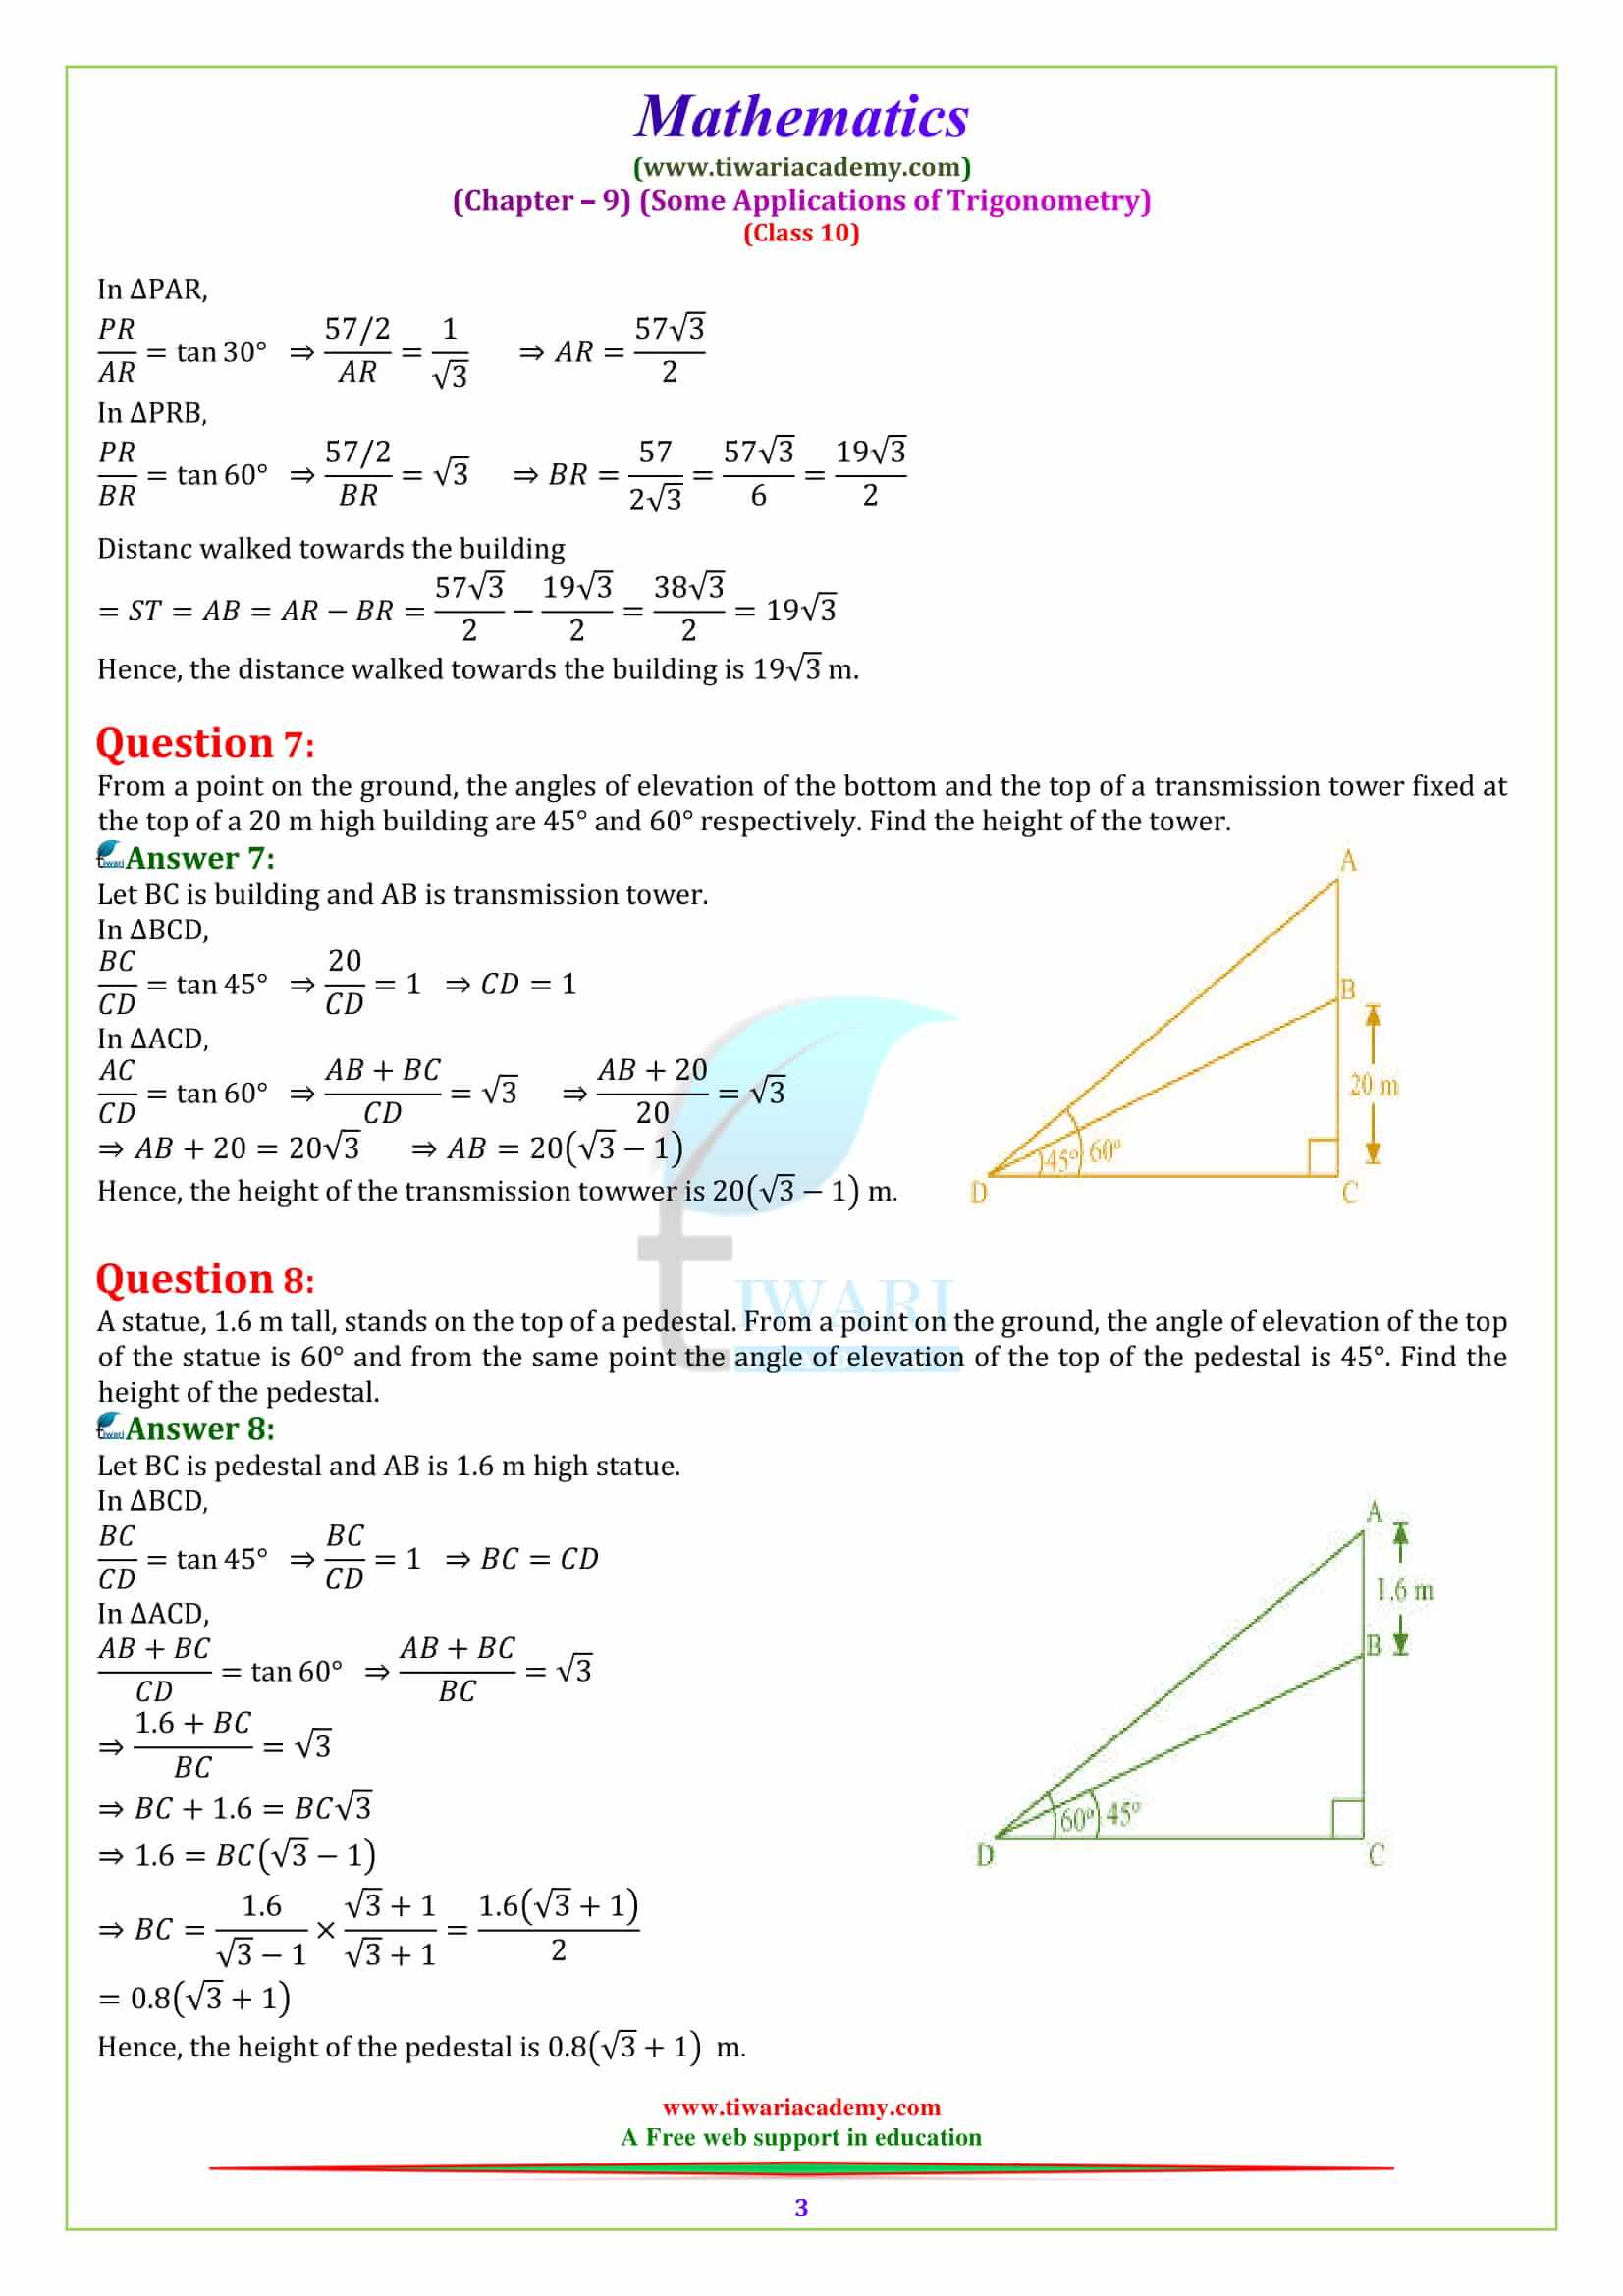 NCERT Solutions for class 10 Maths Chapter 9 Exercise 9.1 in pdf form